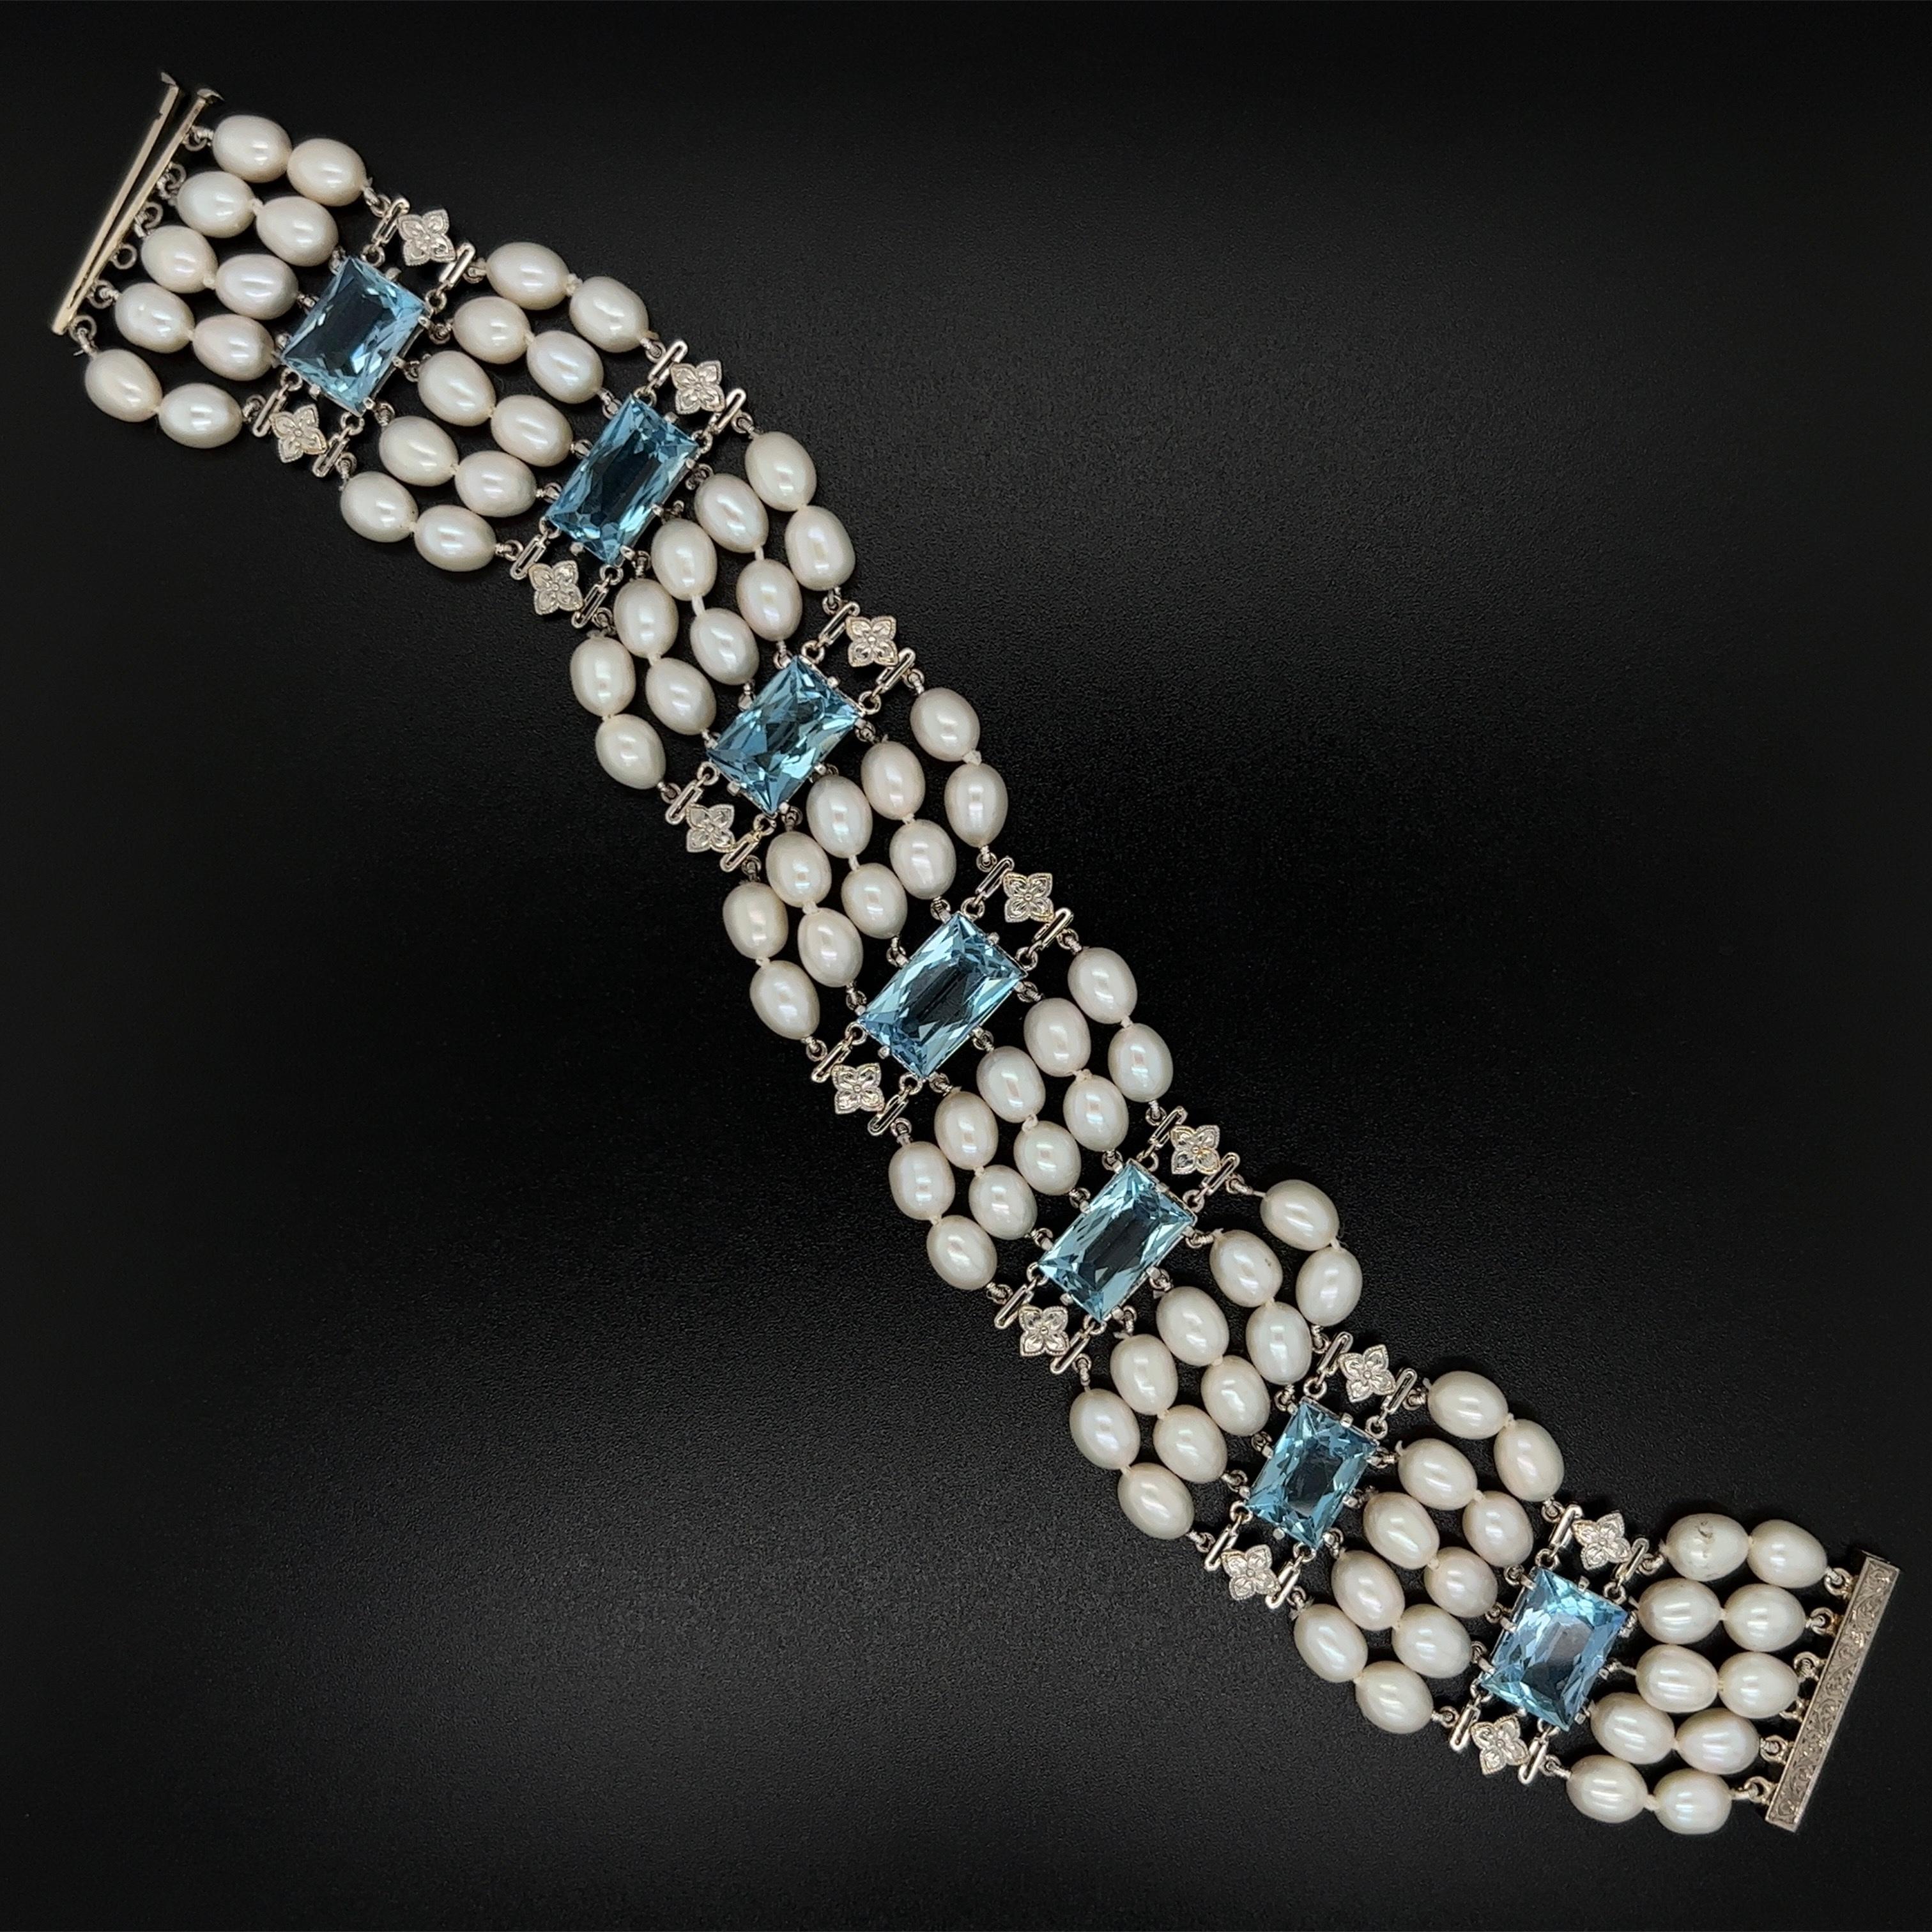 Simply Beautiful! Mid Century Modern Aquamarine and Pearl 5 Strand Bracelet. Featuring 7 rectangular Deep Blue Aquamarines weighing approx. 28tcw. inter-spaced with Pearls. Bracelet measures approx. 7.5” l x 1” w. Circa 1950s. More Beautiful in real